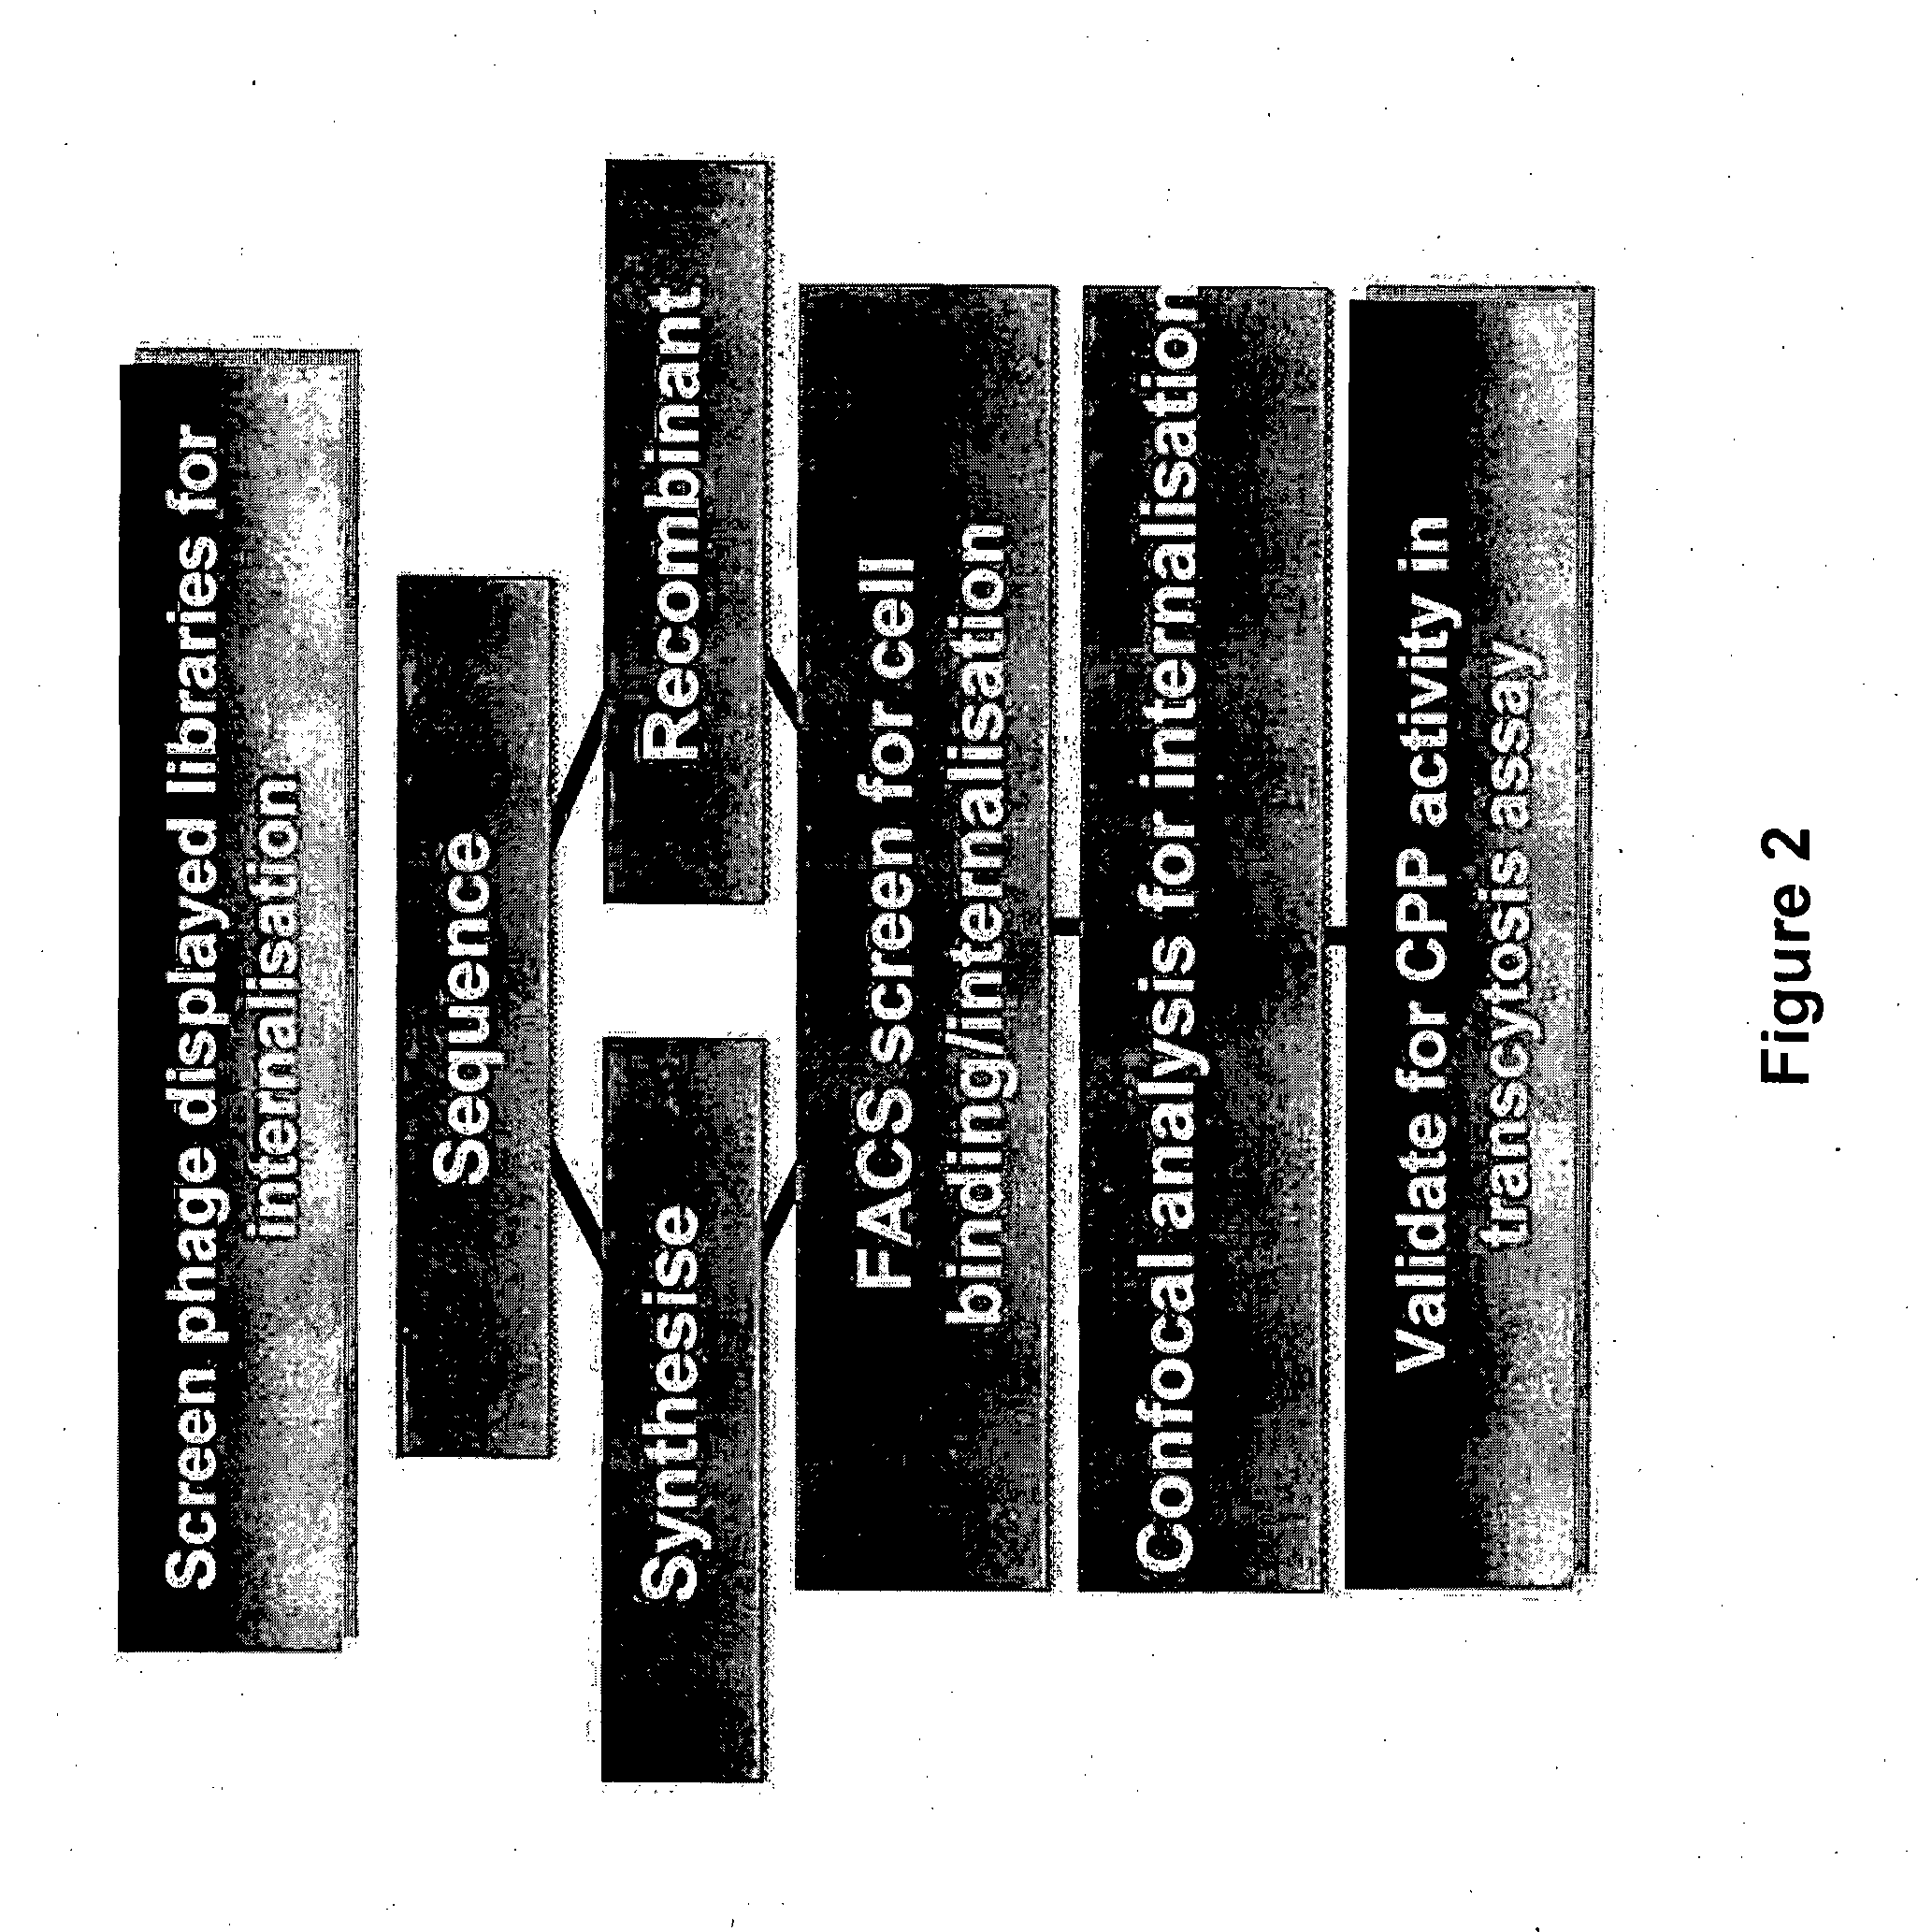 Method of Determining, Identifying or Isolating Cell-Penetrating Peptides